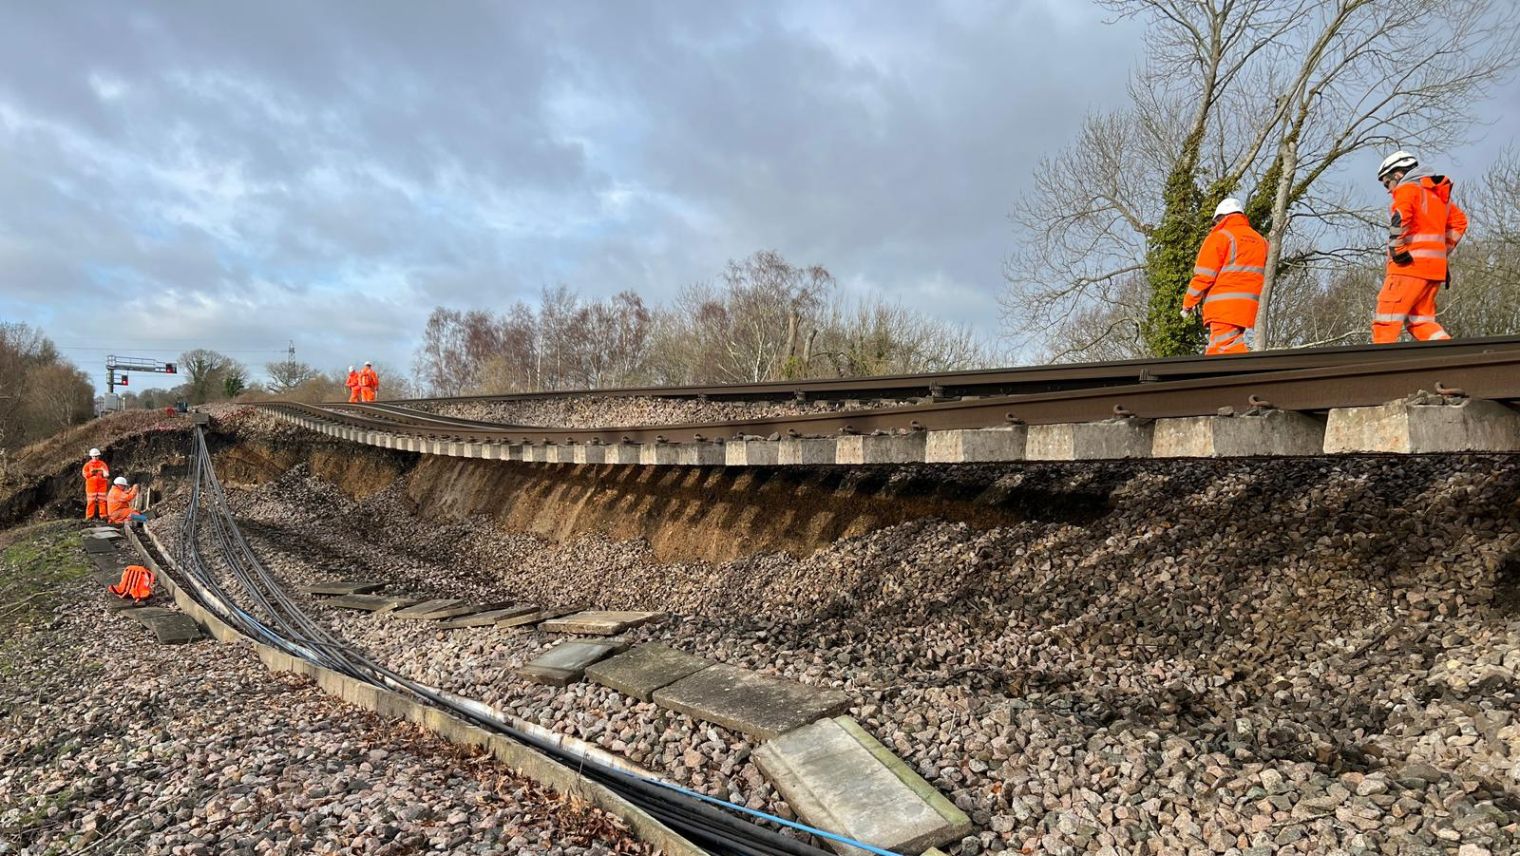 Hook landslip was so severe that it left one track in mid-air, with another badly damaged